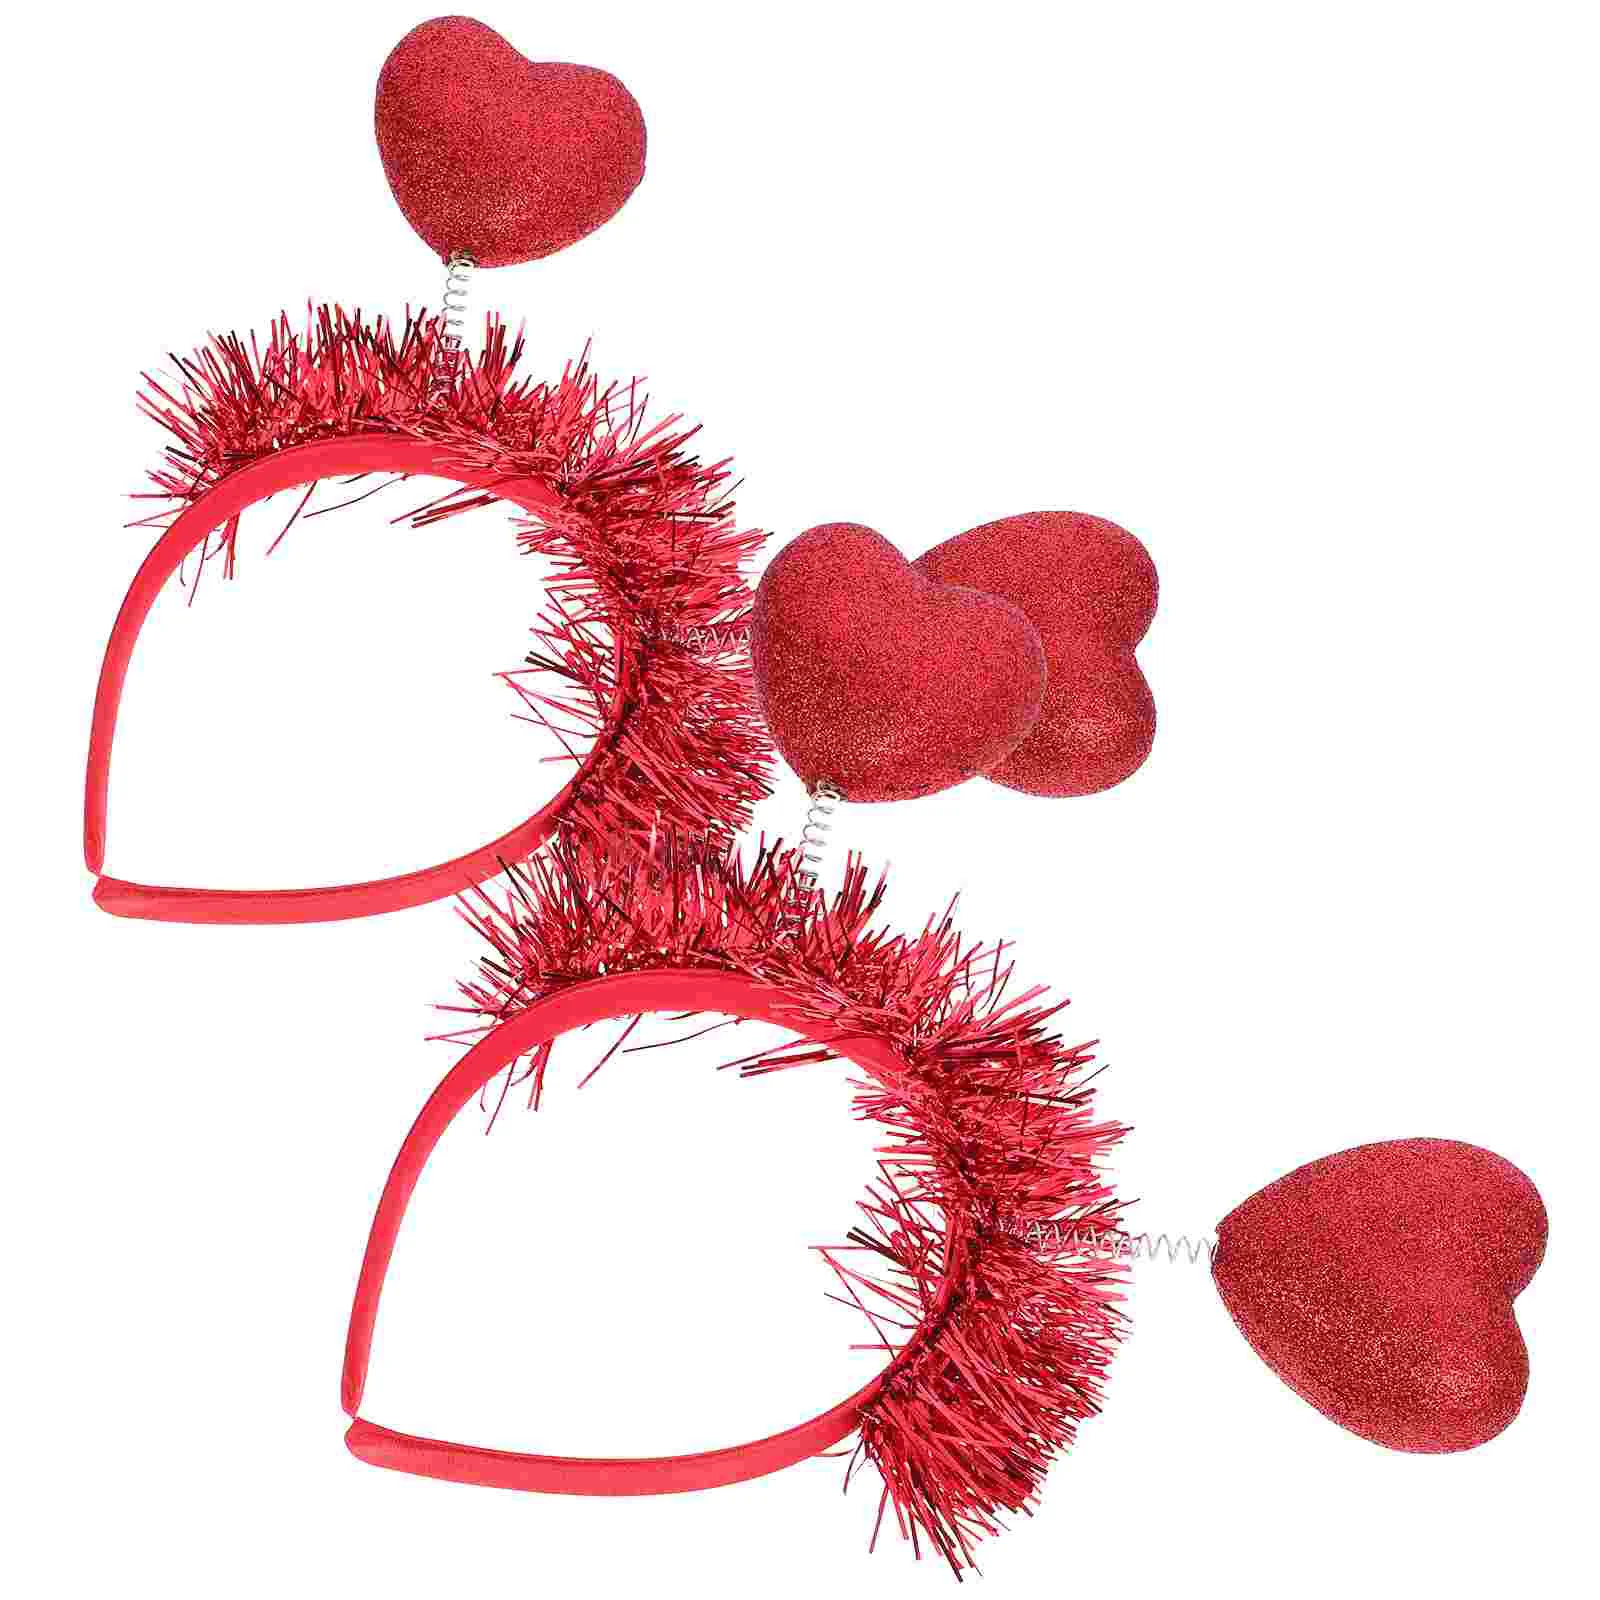 2 Pcs Love Headband Props Valentines Day Party Hairband Wedding Decorations Photography Headpiece Heart-shaped dvotinst newborn baby photography props christmas green knitted outfits trees x mas decorations studio shooting photo props